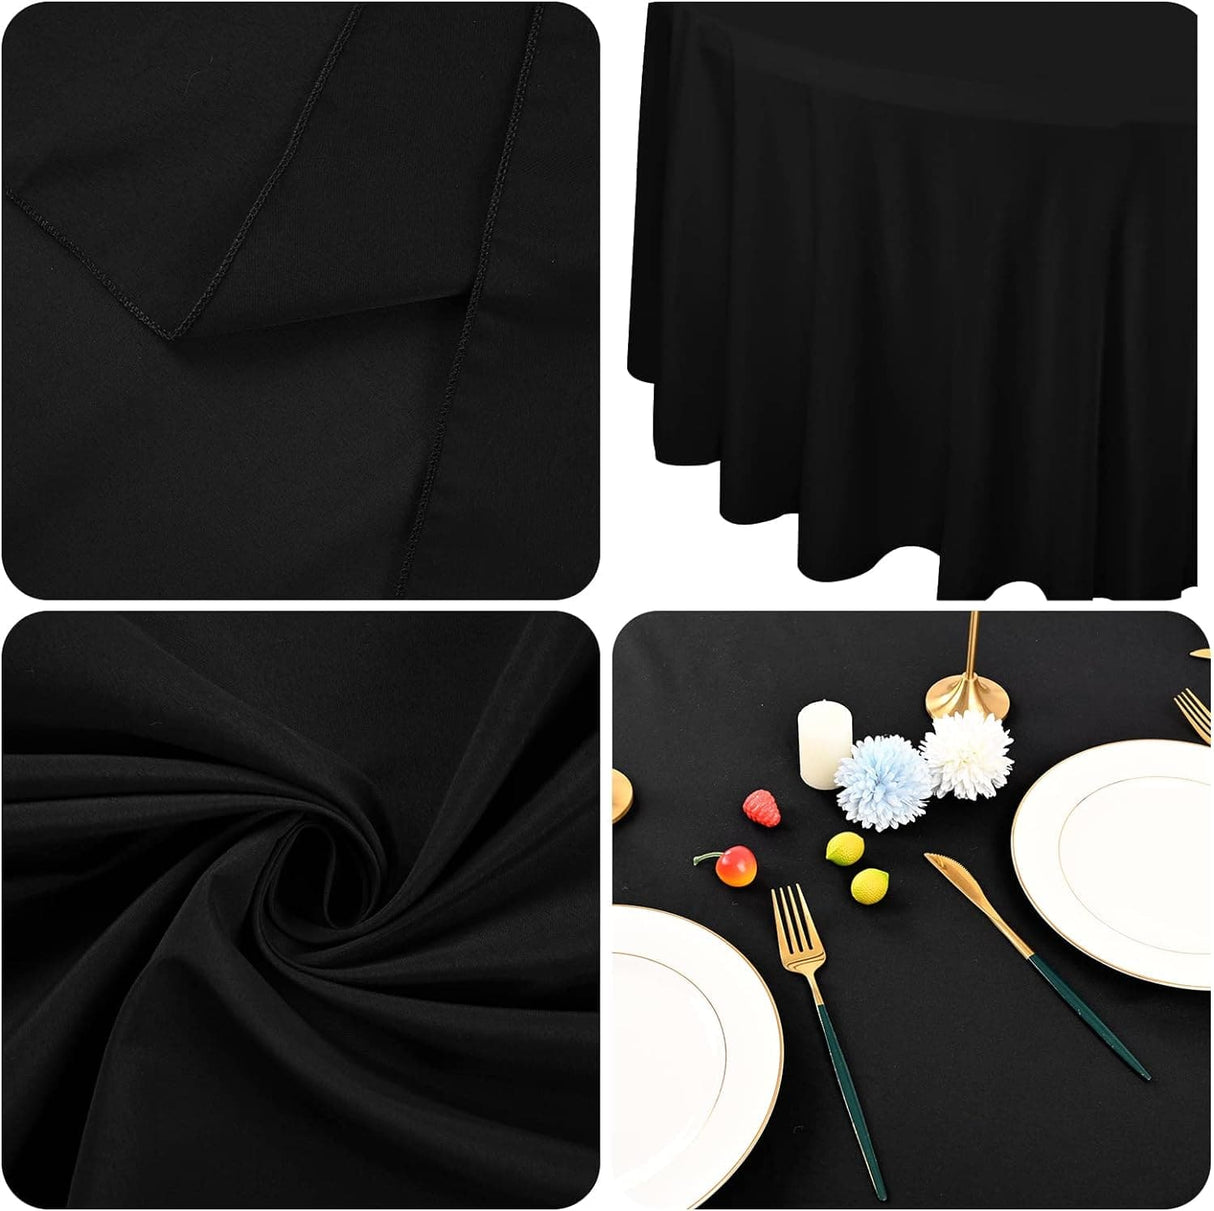 2/4/6 Pack Round Tablecloths - 60/90/108 Inch, White Polyester Table Cover for Round Table, Stain and Wrinkle Resistant Washable Fabric Table Cloth, Polyester Tablecloth for Wedding Banquet Parties